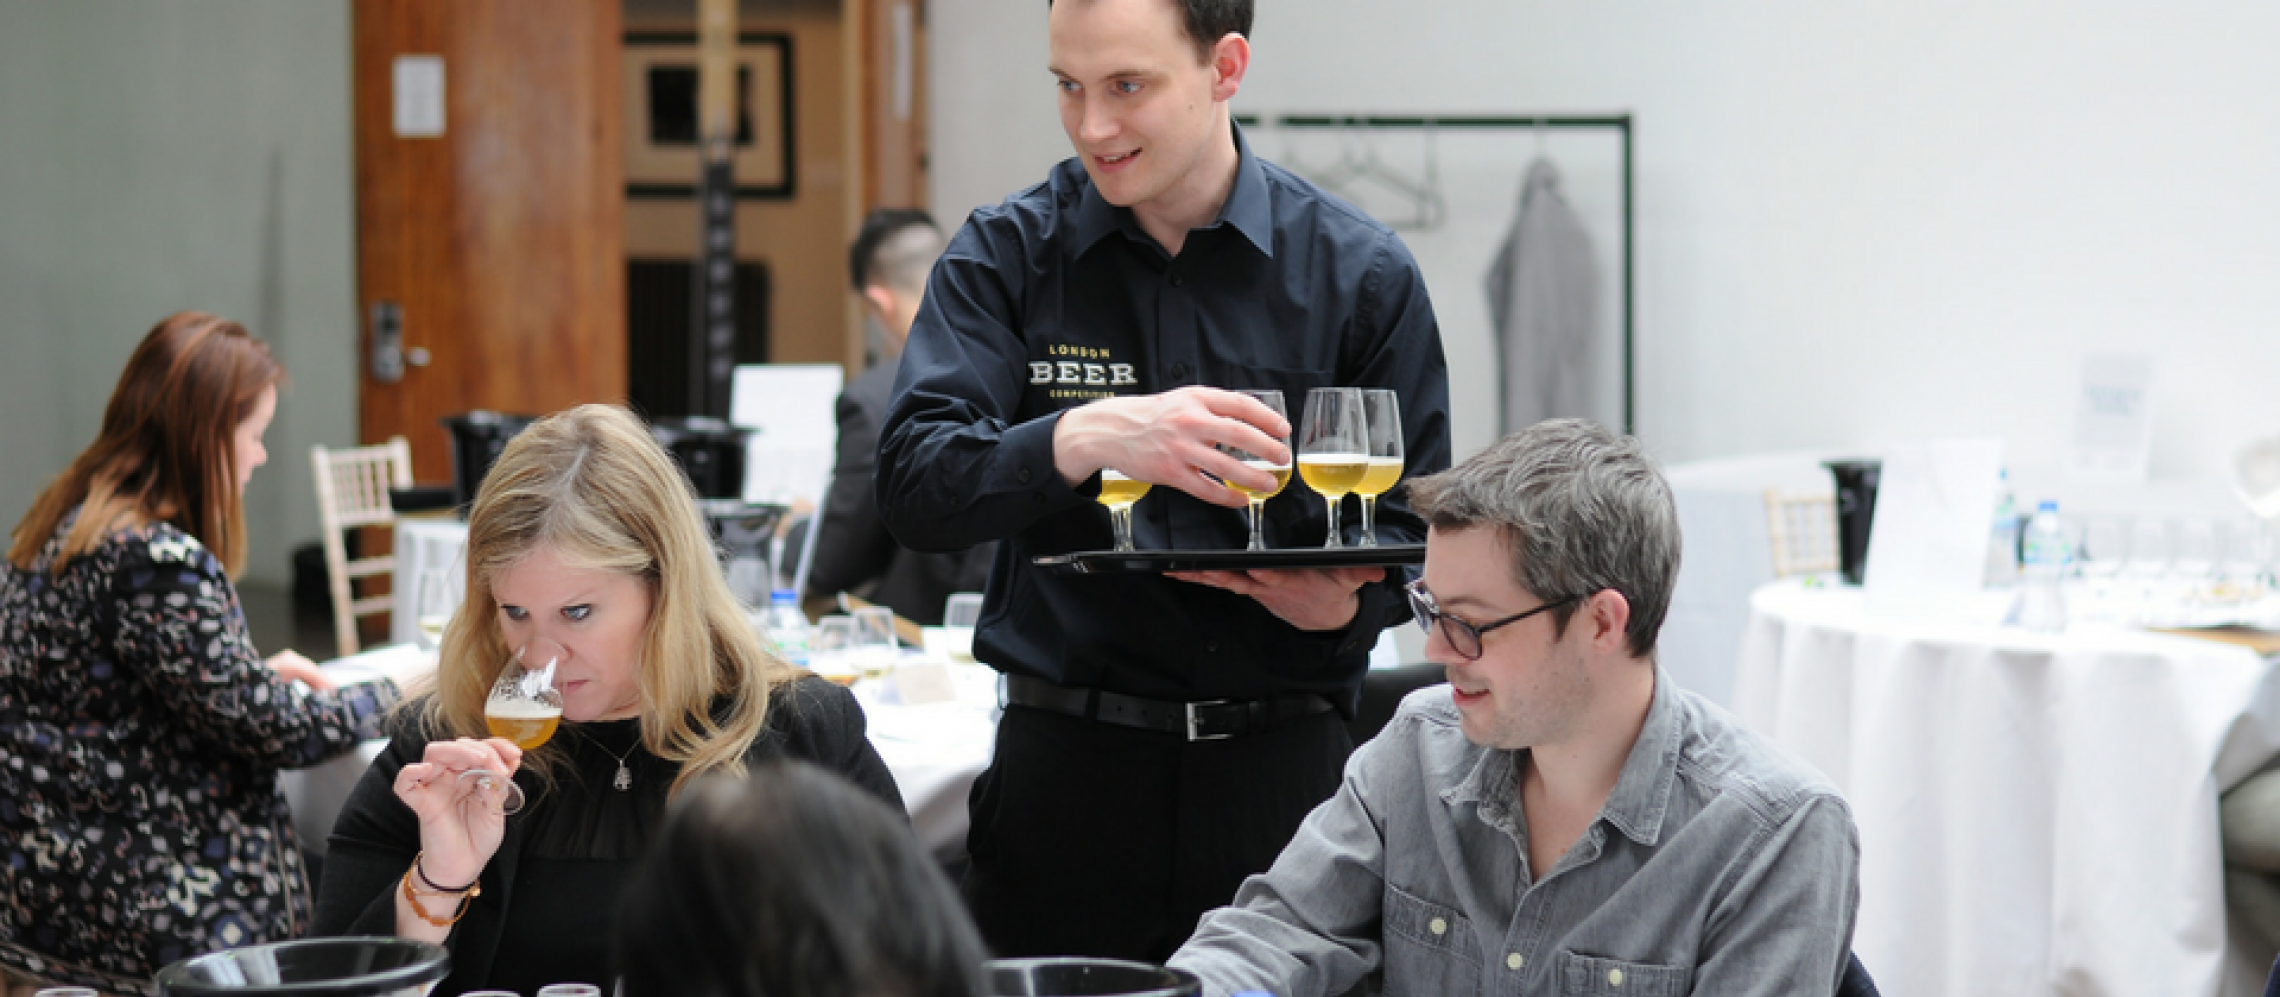 Photo for: Spanish Stout Shines In Game-changing New Beer Competition In London